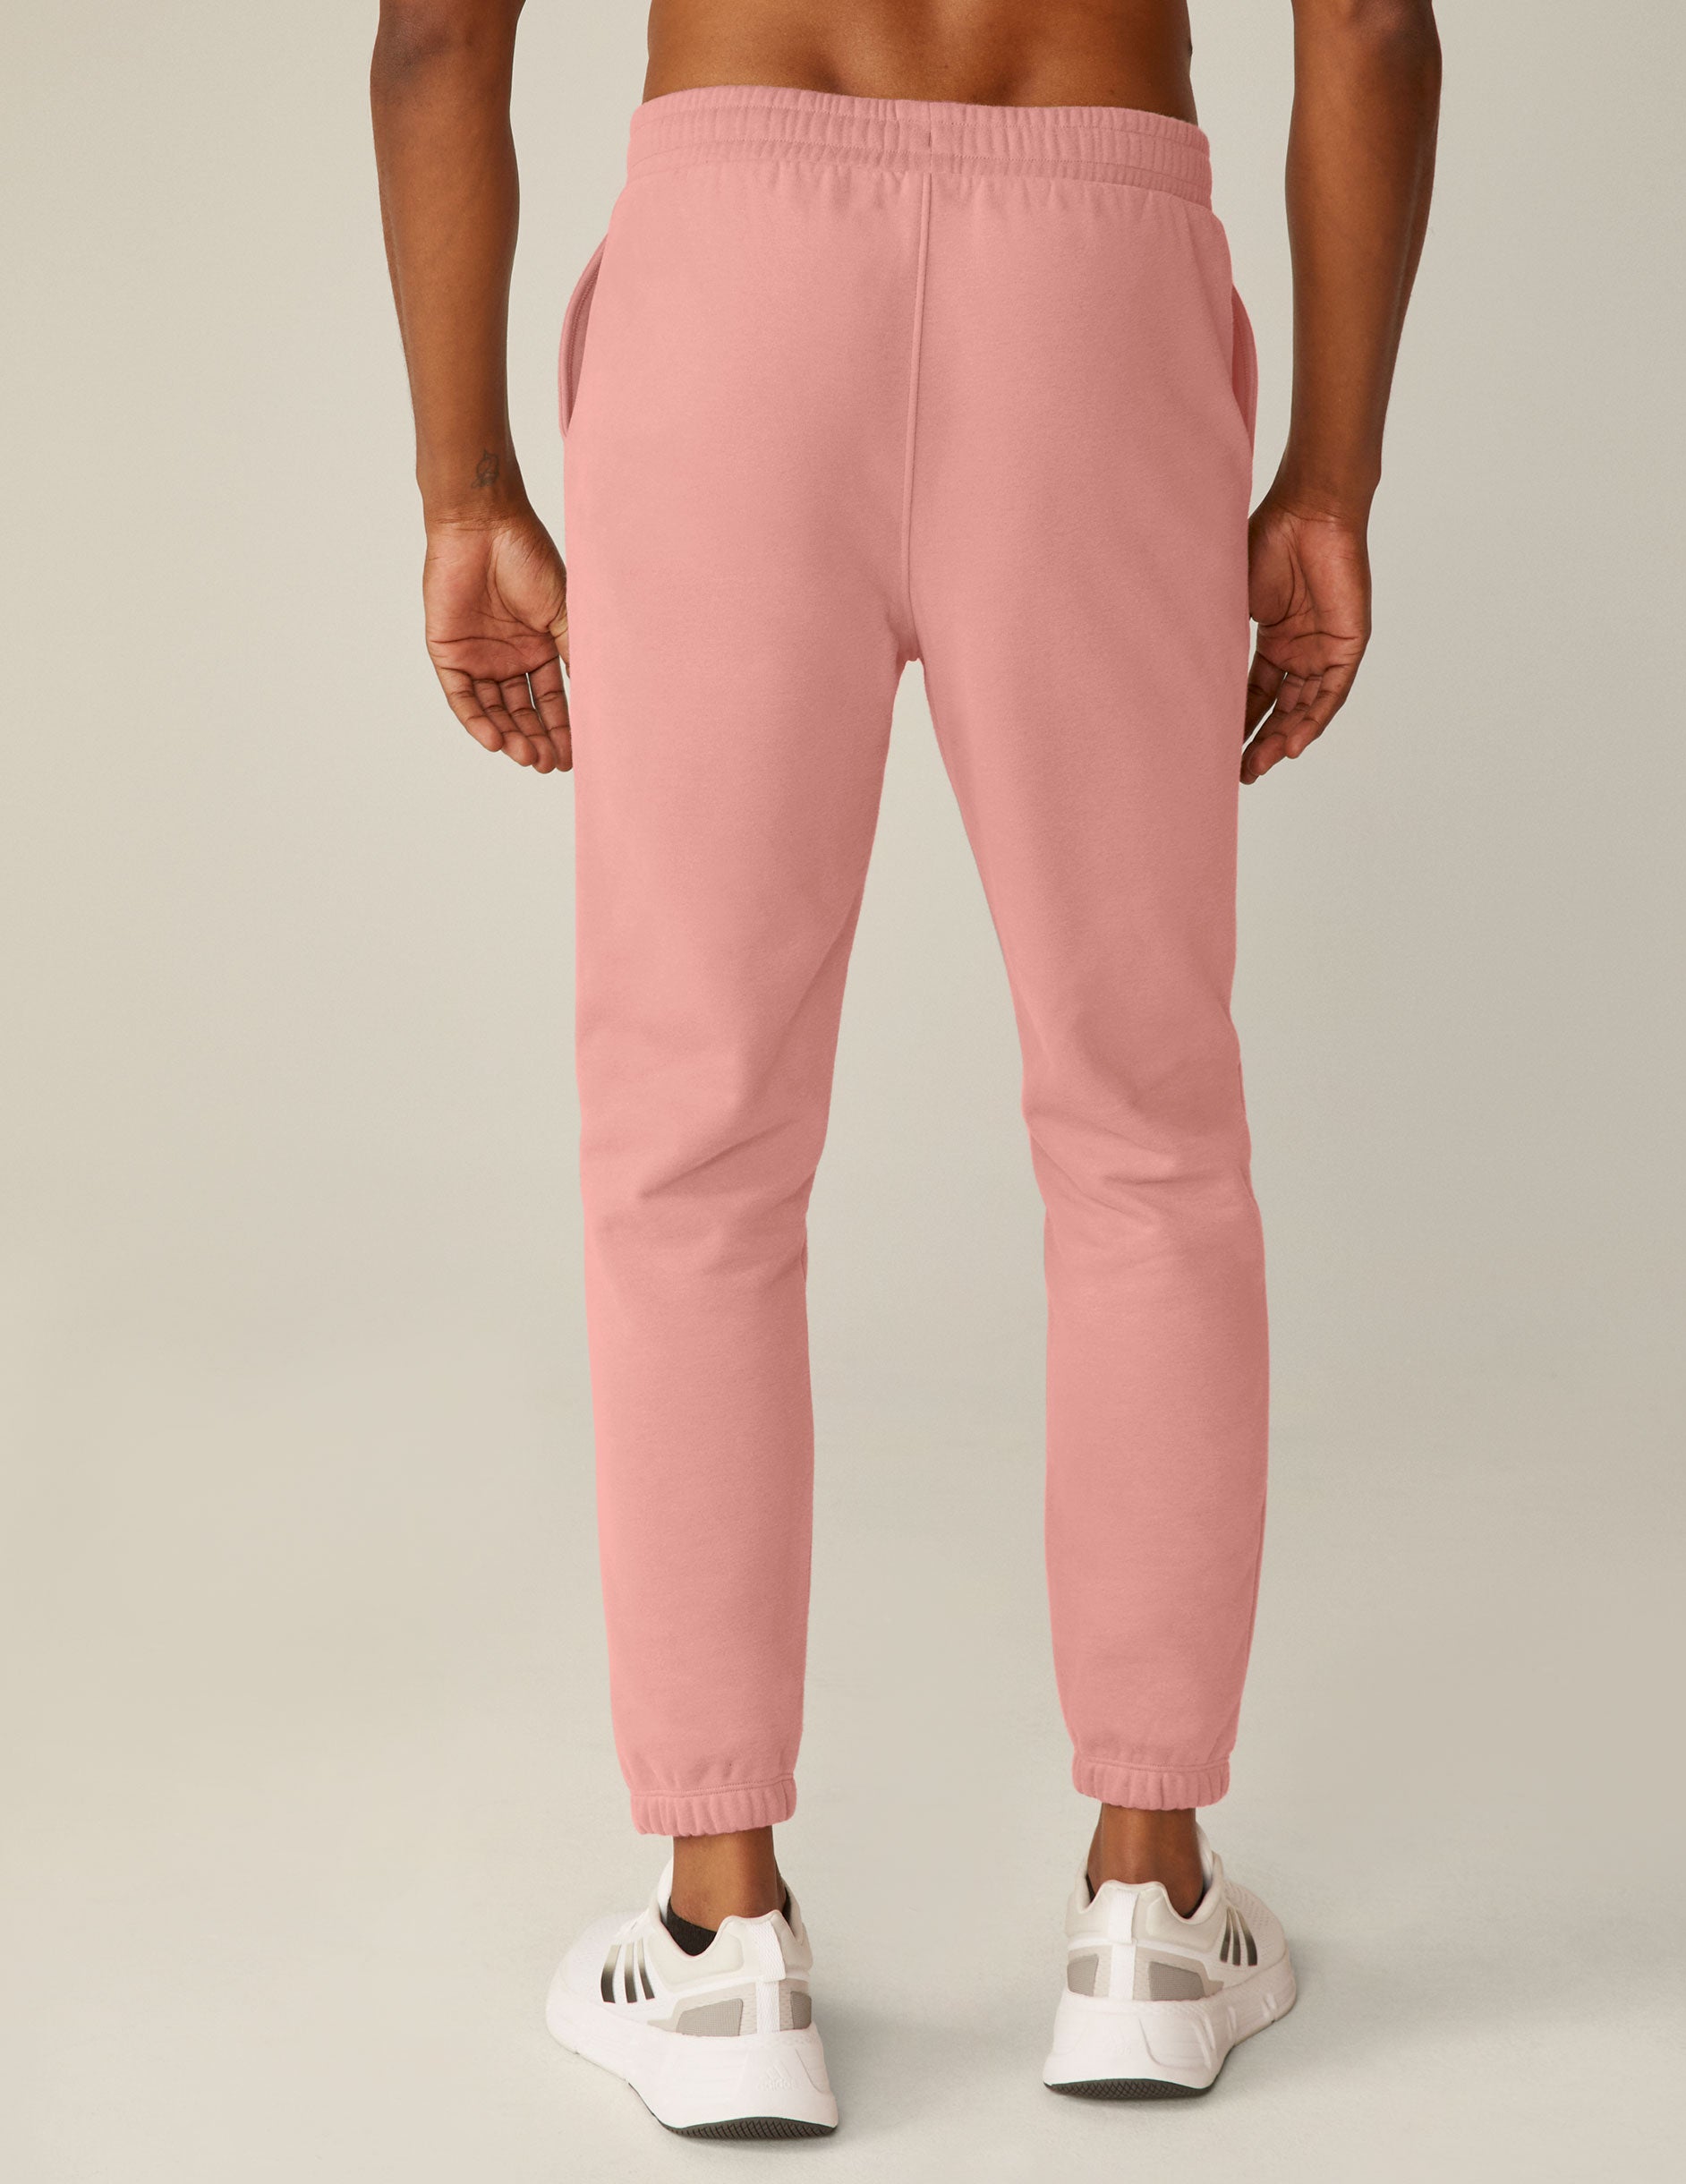 pink men's sweatpants with pockets. 